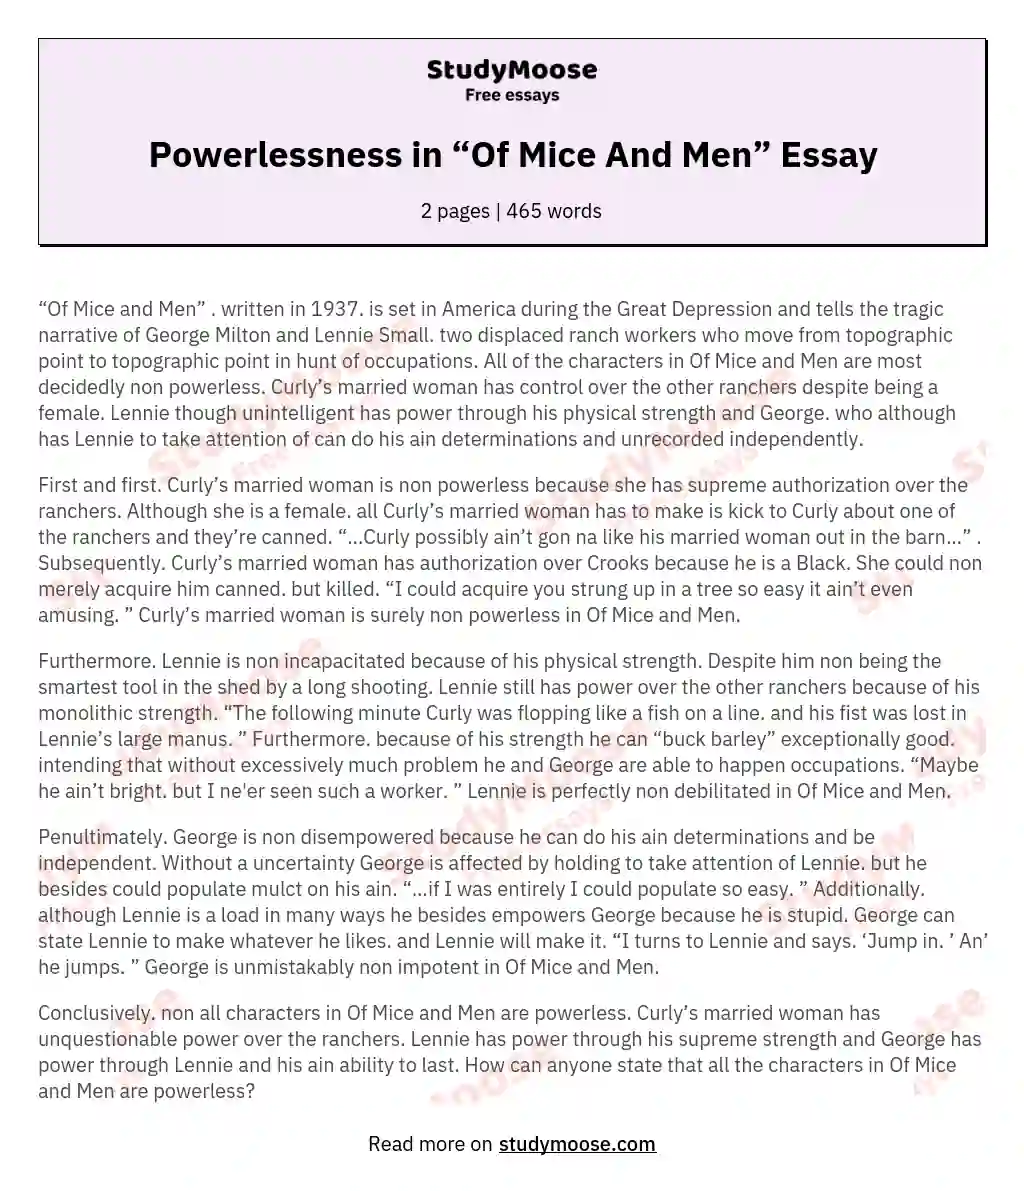 Powerlessness in “Of Mice And Men” Essay